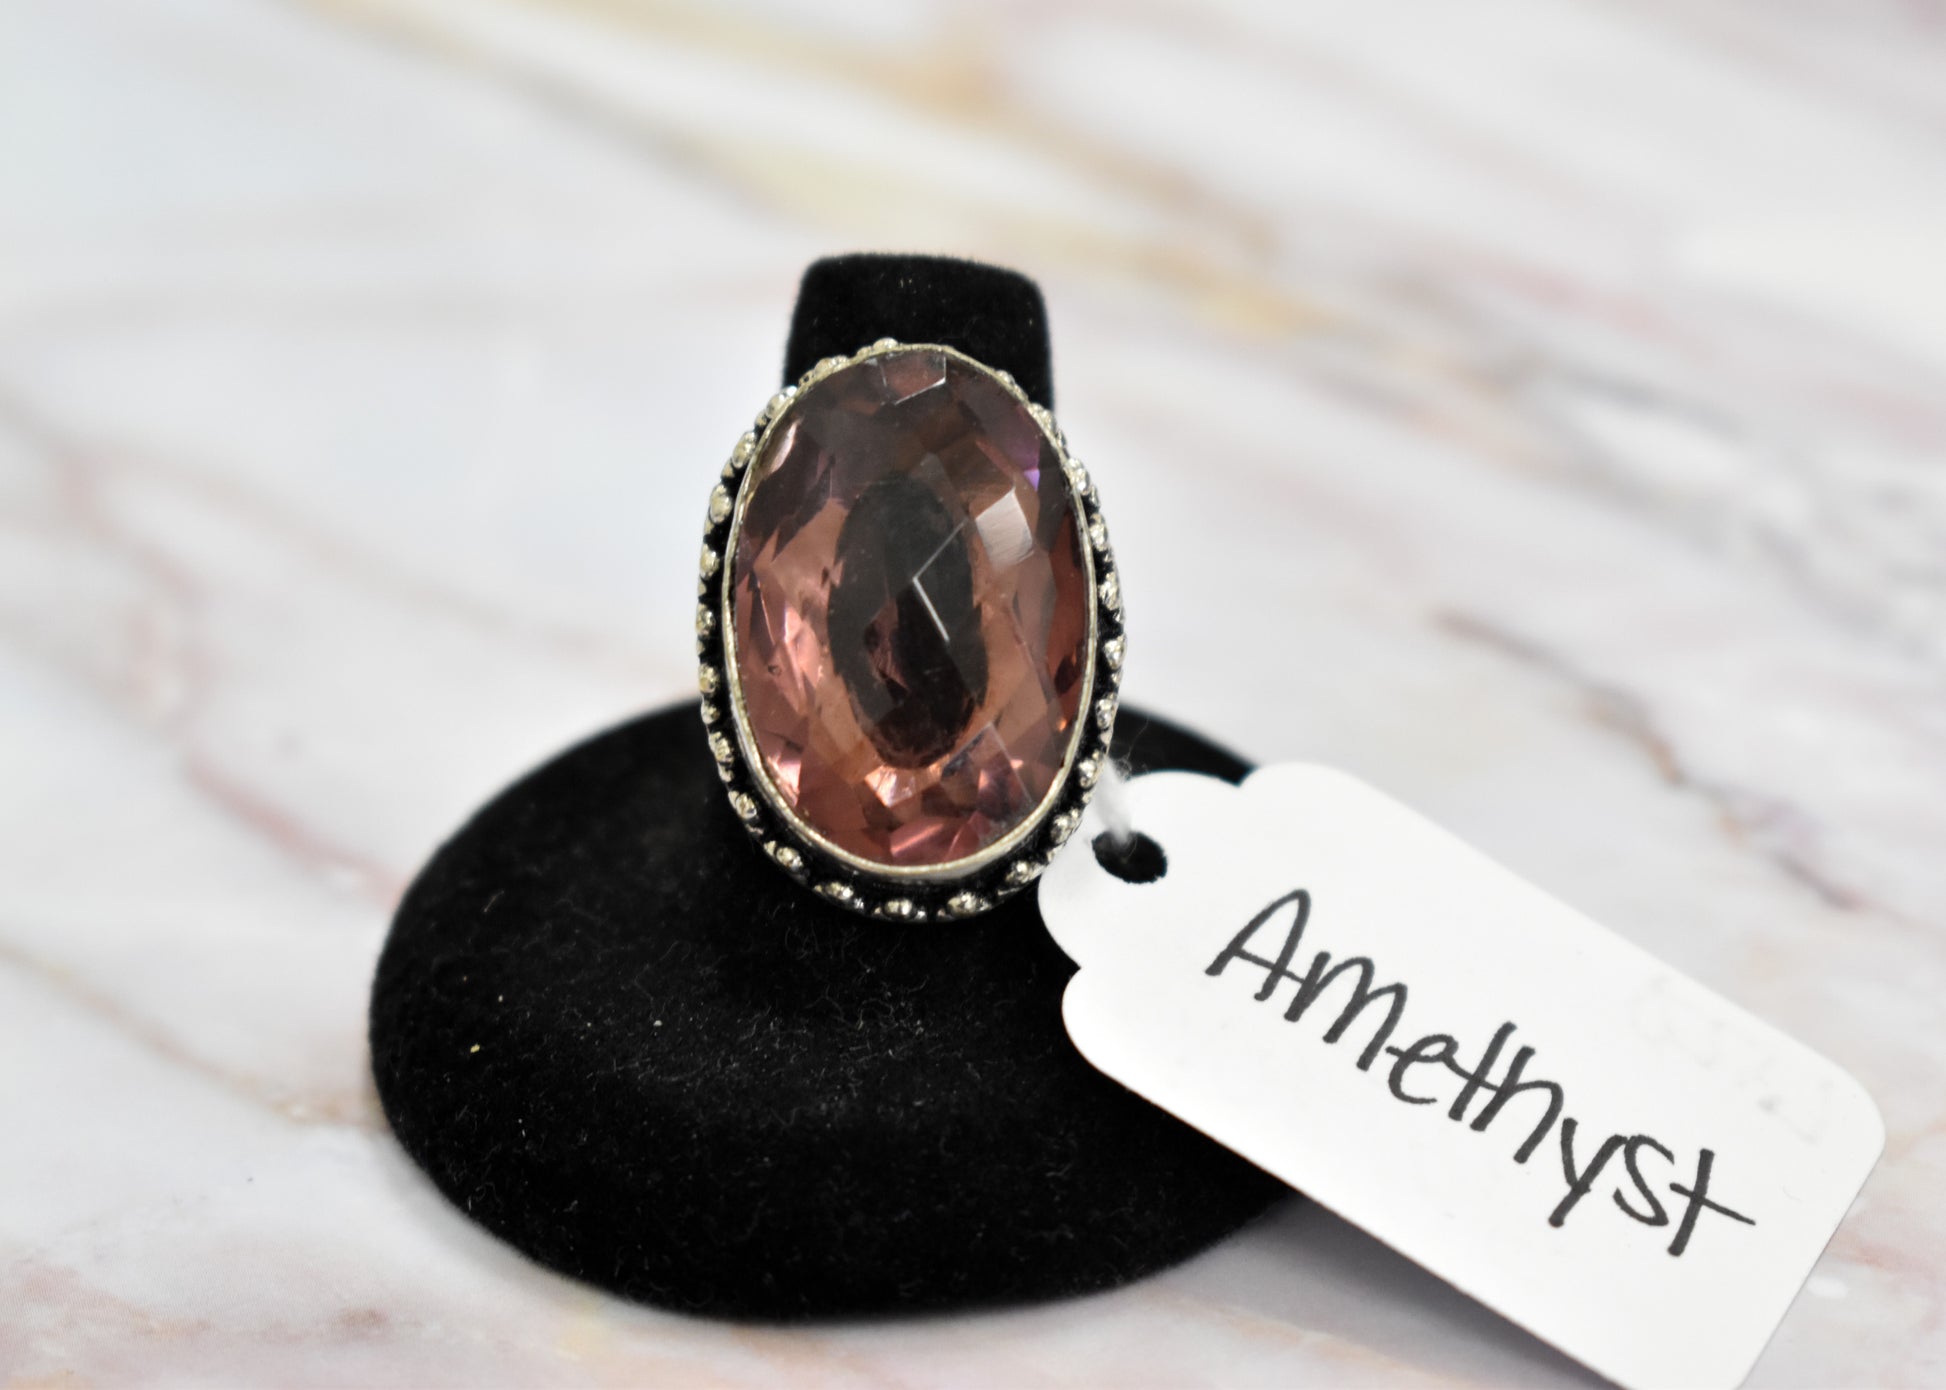 stones-of-transformation - Amethyst Ring (Size 8.5) - Stones of Transformation - 